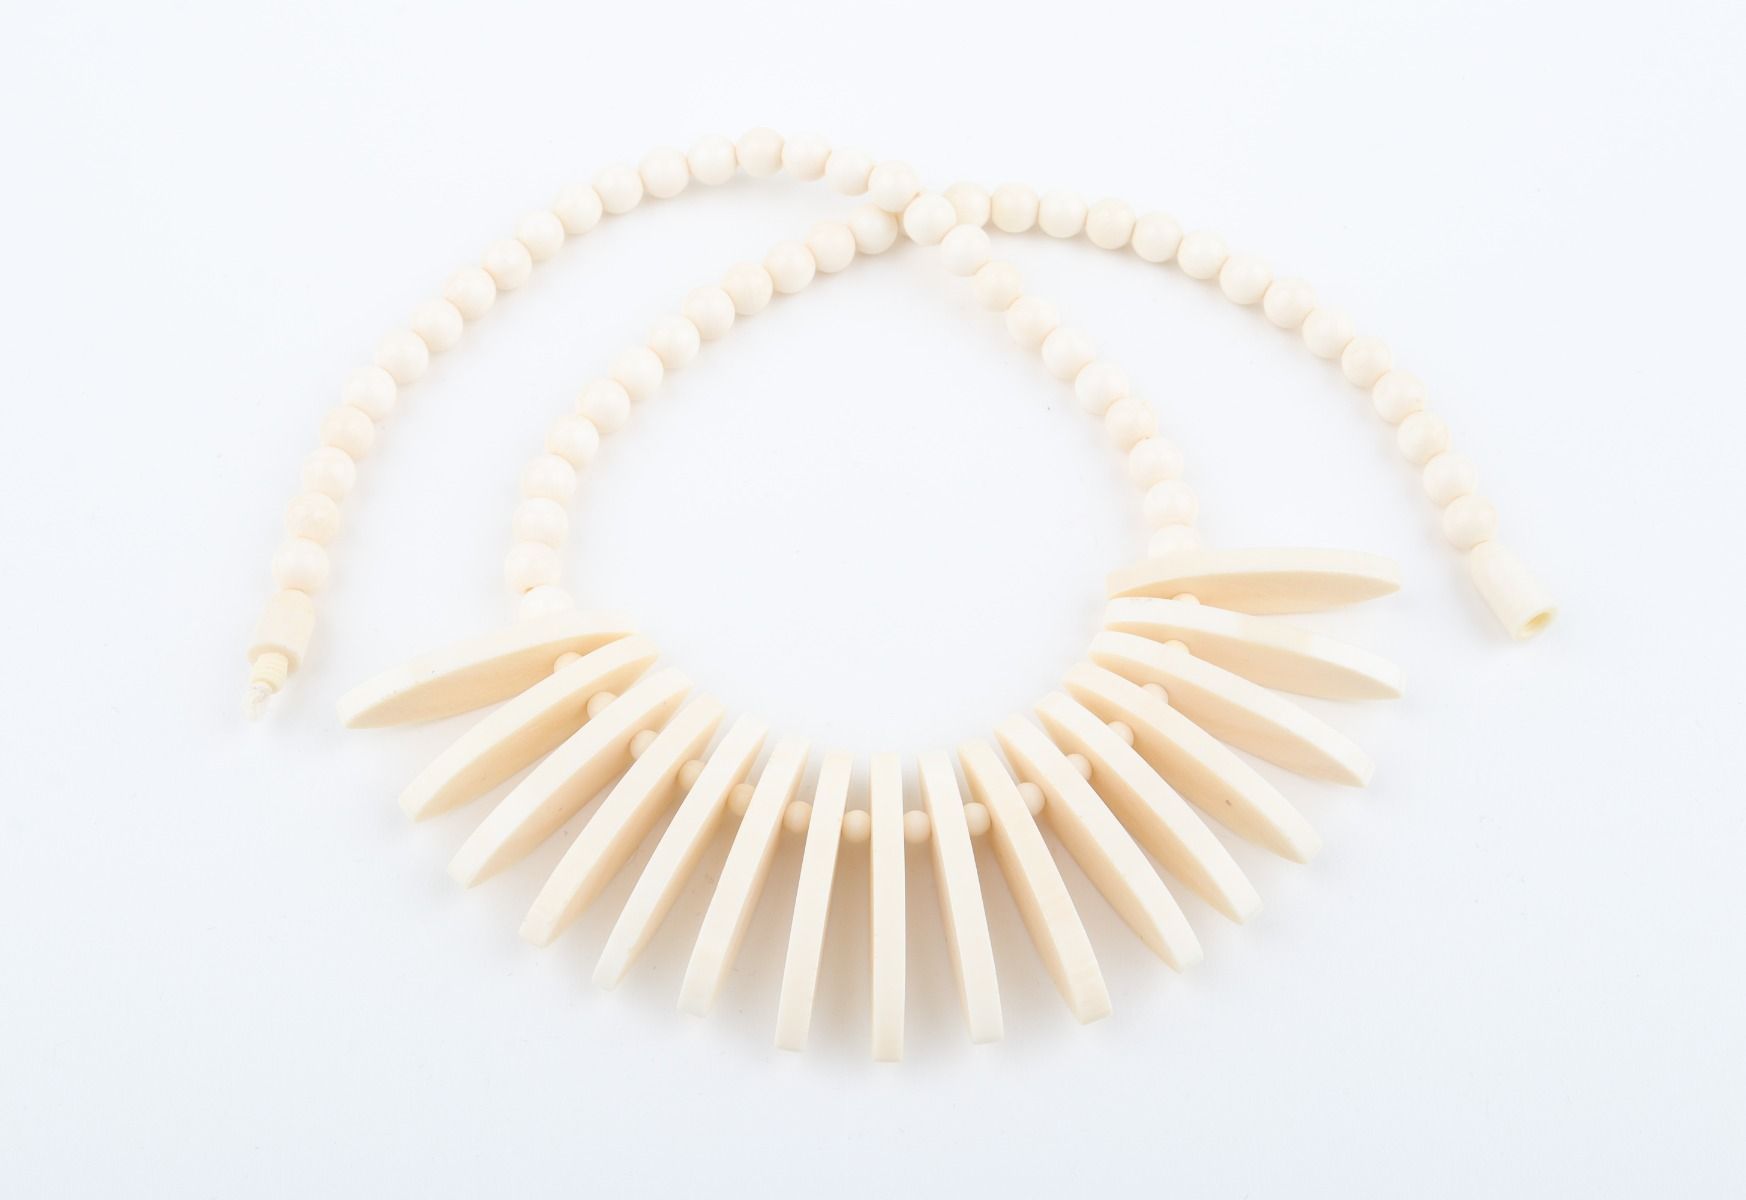 Mammoth Ivory Statement Necklace